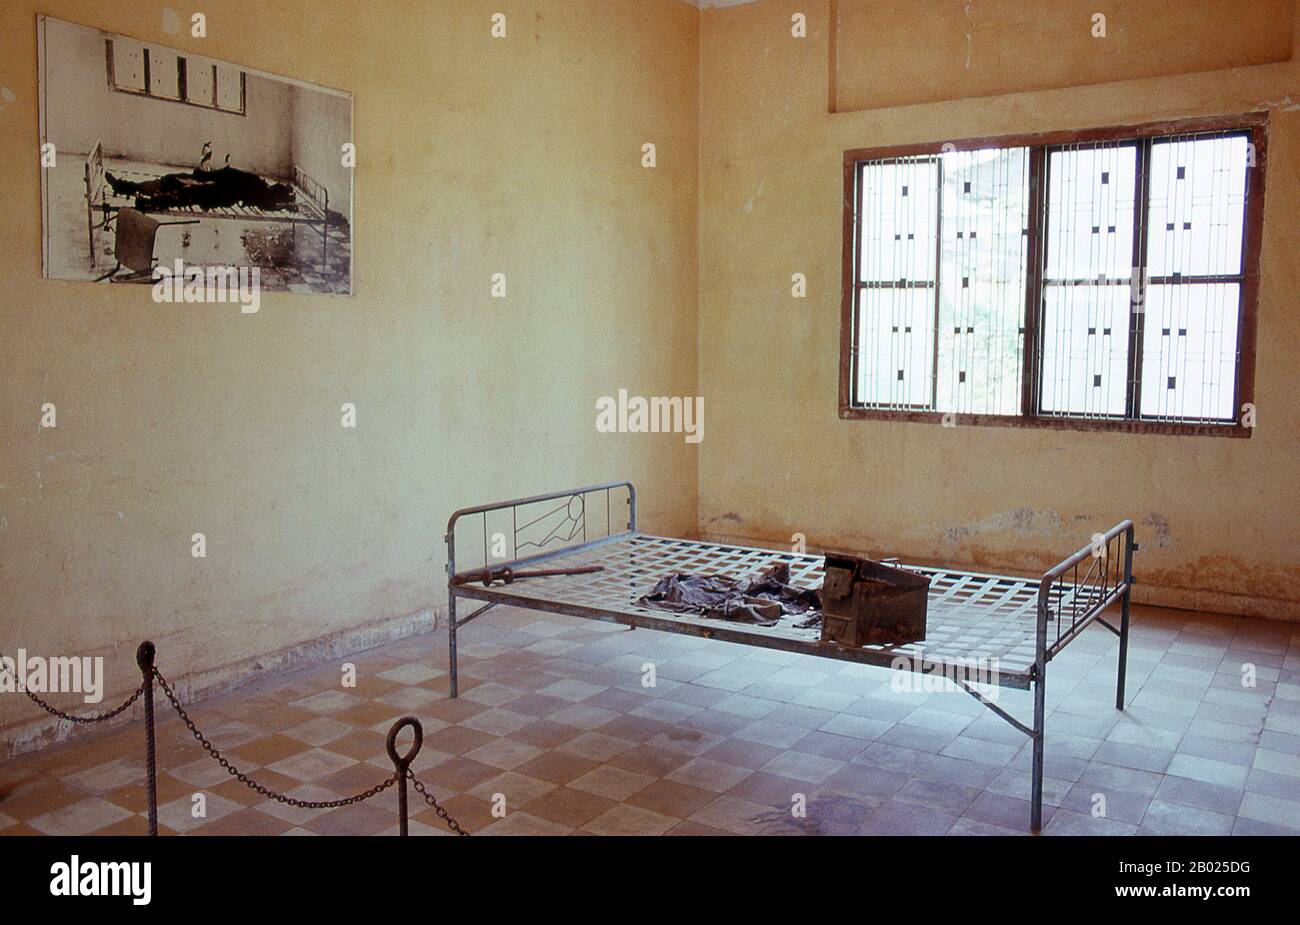 Located in Phnom Penh, the capital of Cambodia, Tuol Sleng is a former high school which was used as the notorious Security Prison 21 (S-21) by the Khmer Rouge communist regime from its rise to power in 1975 to its fall in 1979. An estimated 17,000 Cambodians, including a great number of women and children, were tortured at S-21 into giving confessions and naming accomplices for so-called crimes against the state. Many of the Khmer Rouge’s own cadres were killed at Tuol Sleng after being purged from the Communist Party. Only seven persons are known to have survived S-21. Tuol Sleng means 'Hill Stock Photo